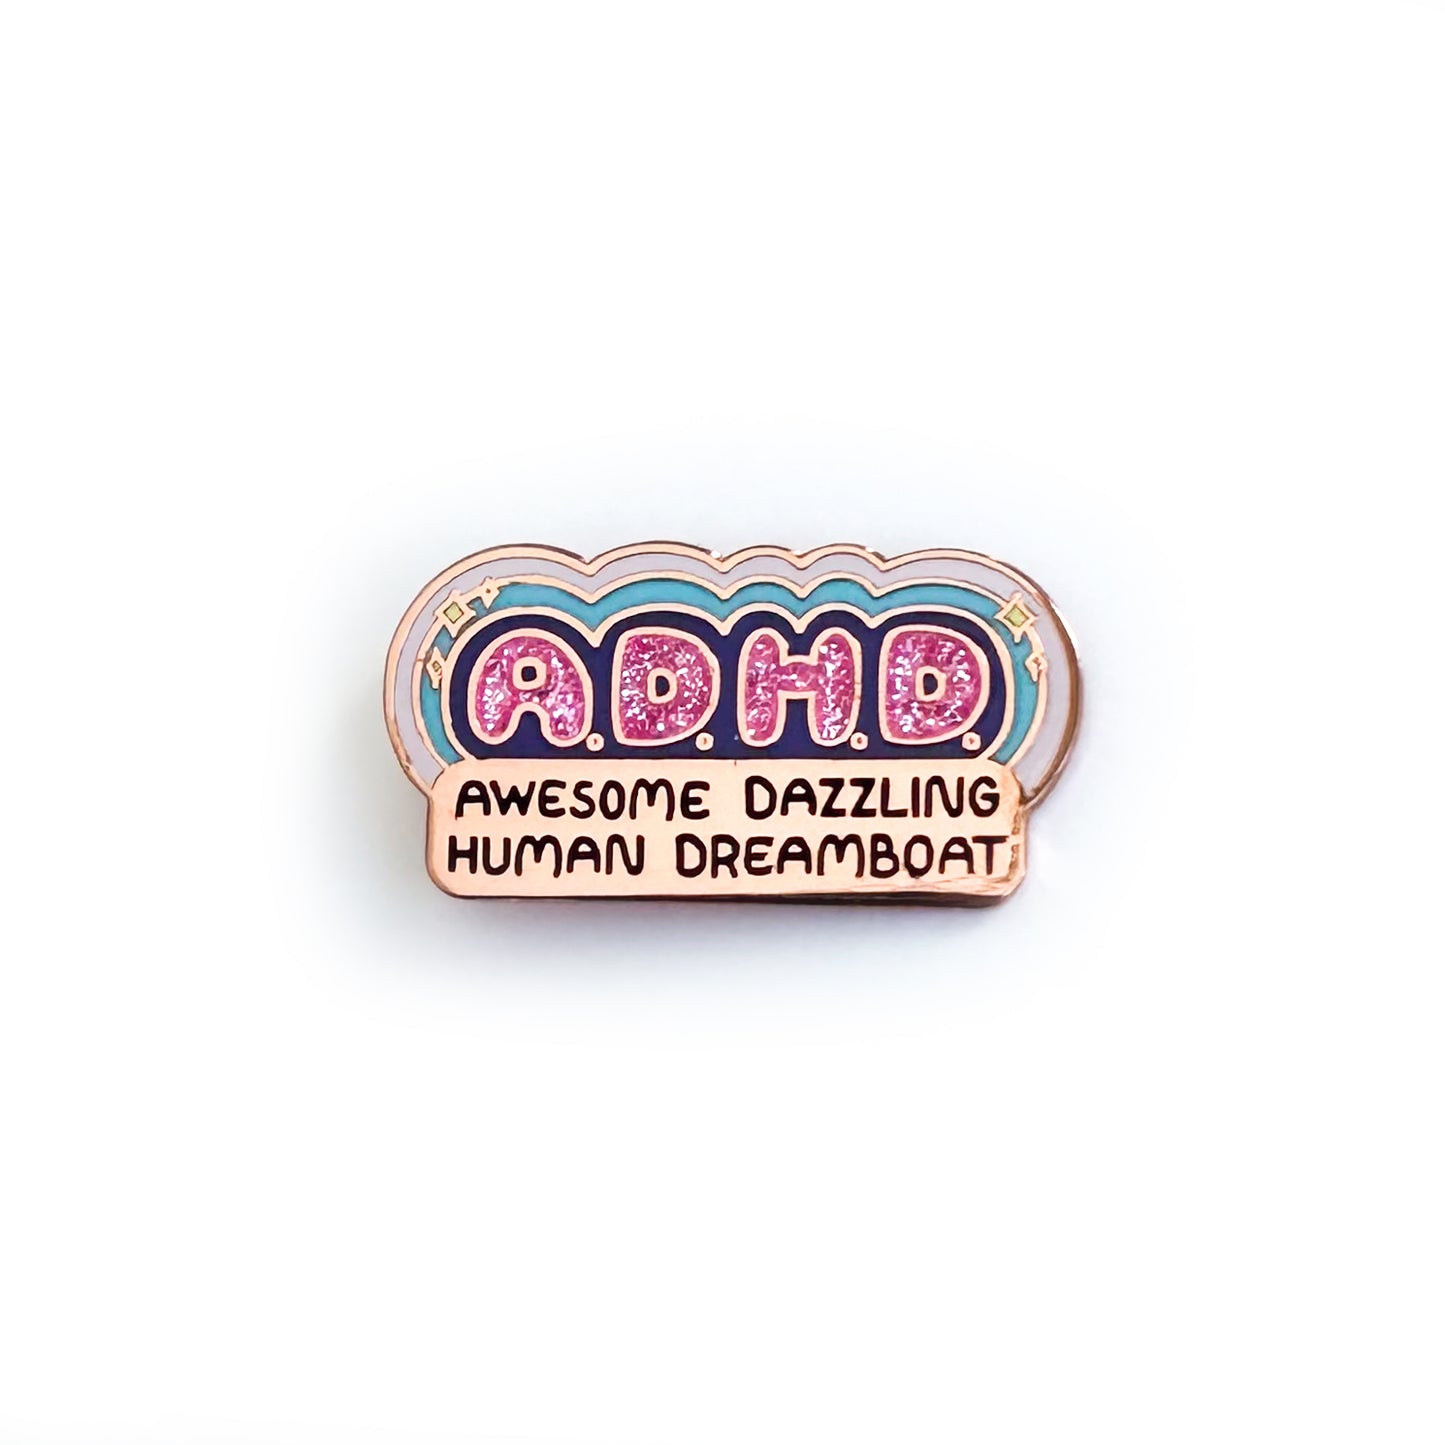 An enamel pin that reads "A.D.H.D. Awesome Dazzling Human Dreamboat" the ADHD letters are in sparkly pink enamel bubble letters with colorful rays and sparkles surrounding them. 